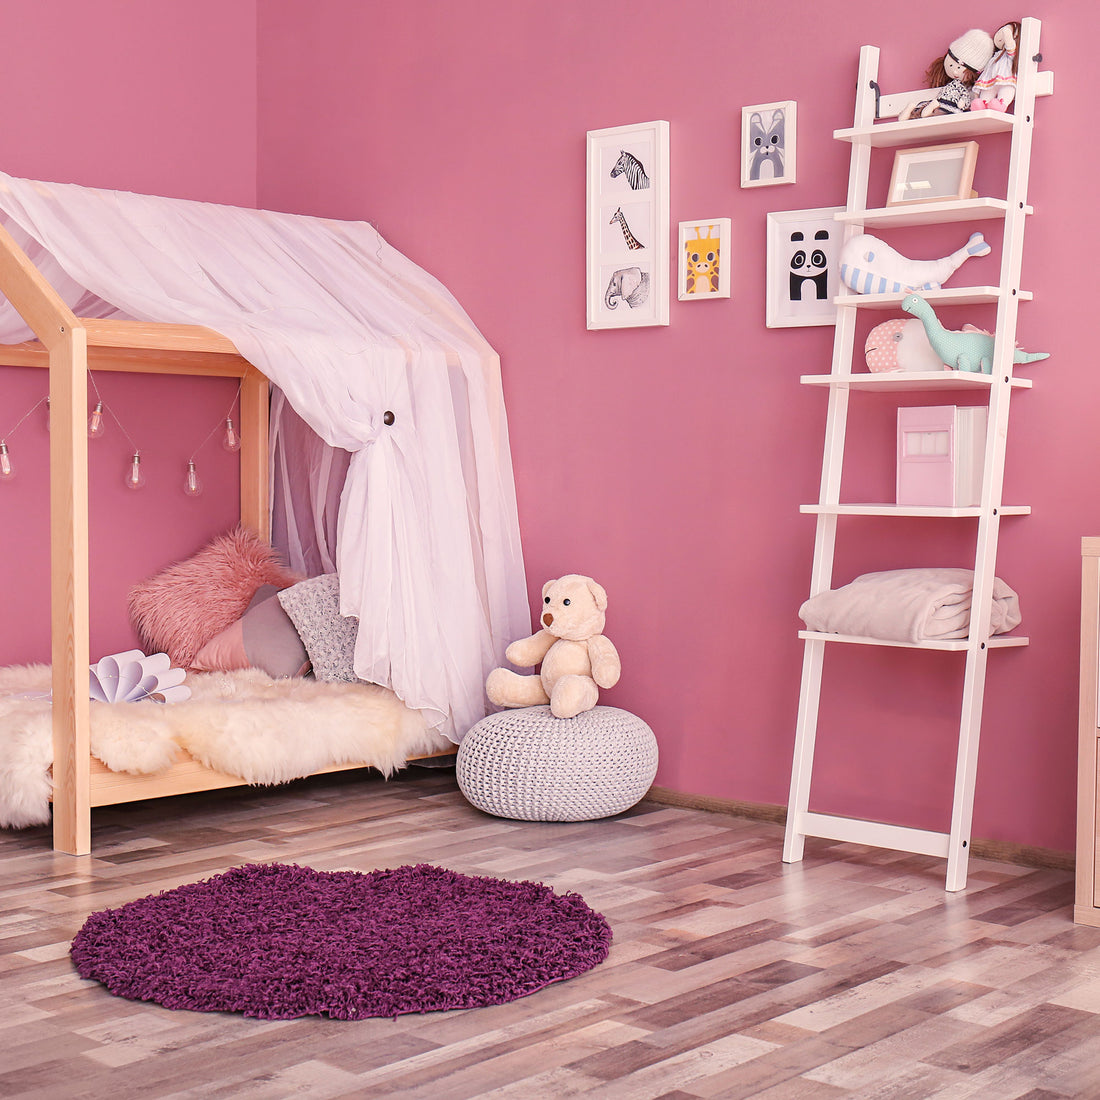 The Impact of Decorating a Kids' Room on Mental Health